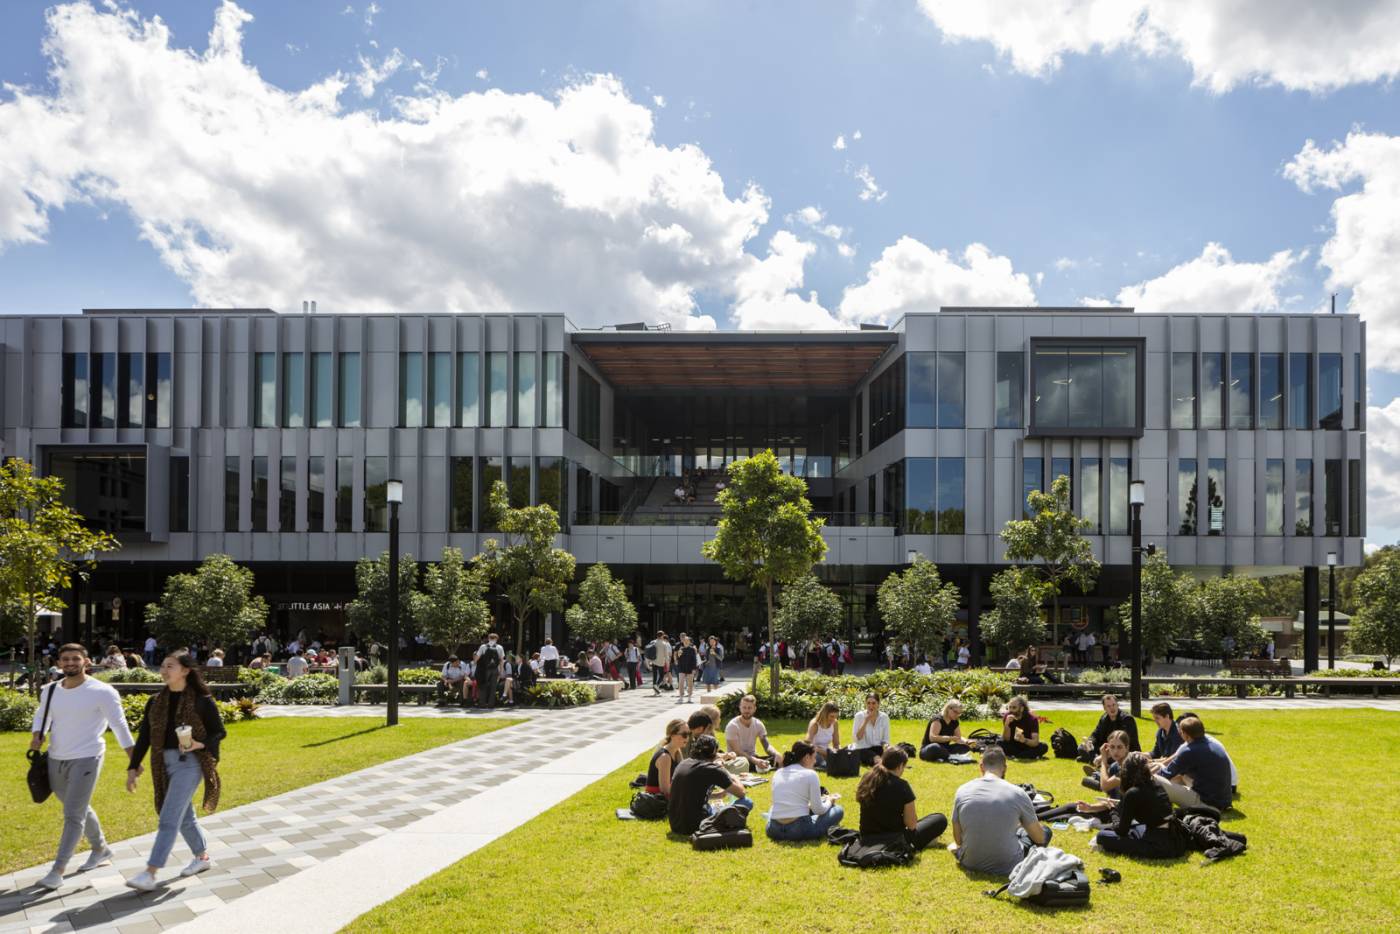 Macquarie University 1 Central Courtyard Building - The Hub 